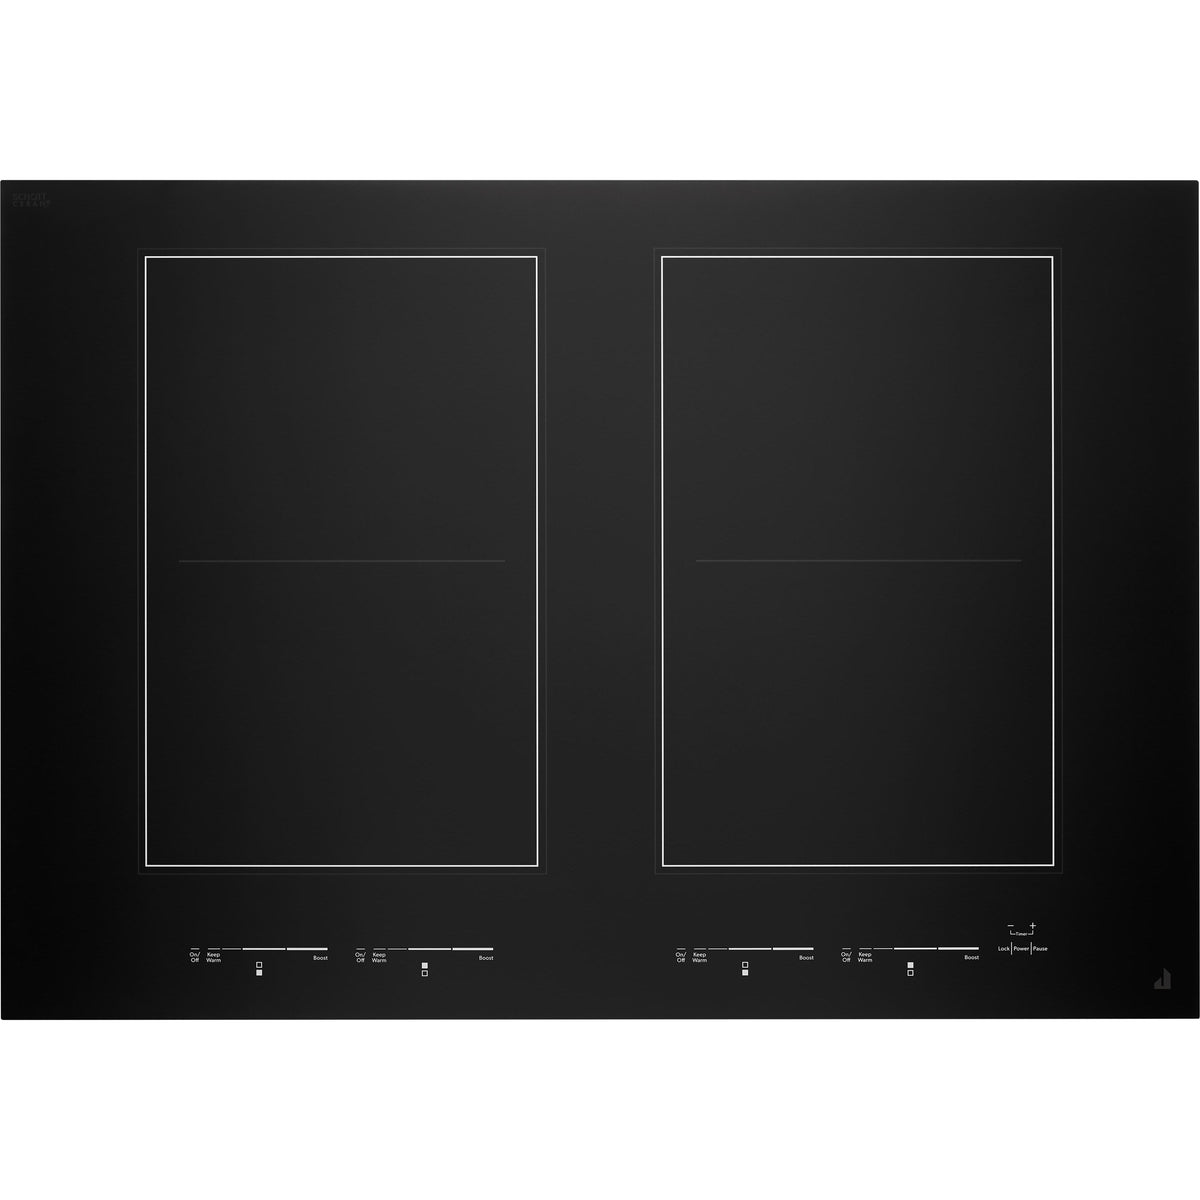 JennAir 30-inch Built-in Induction Cooktop JIC4730HB IMAGE 1